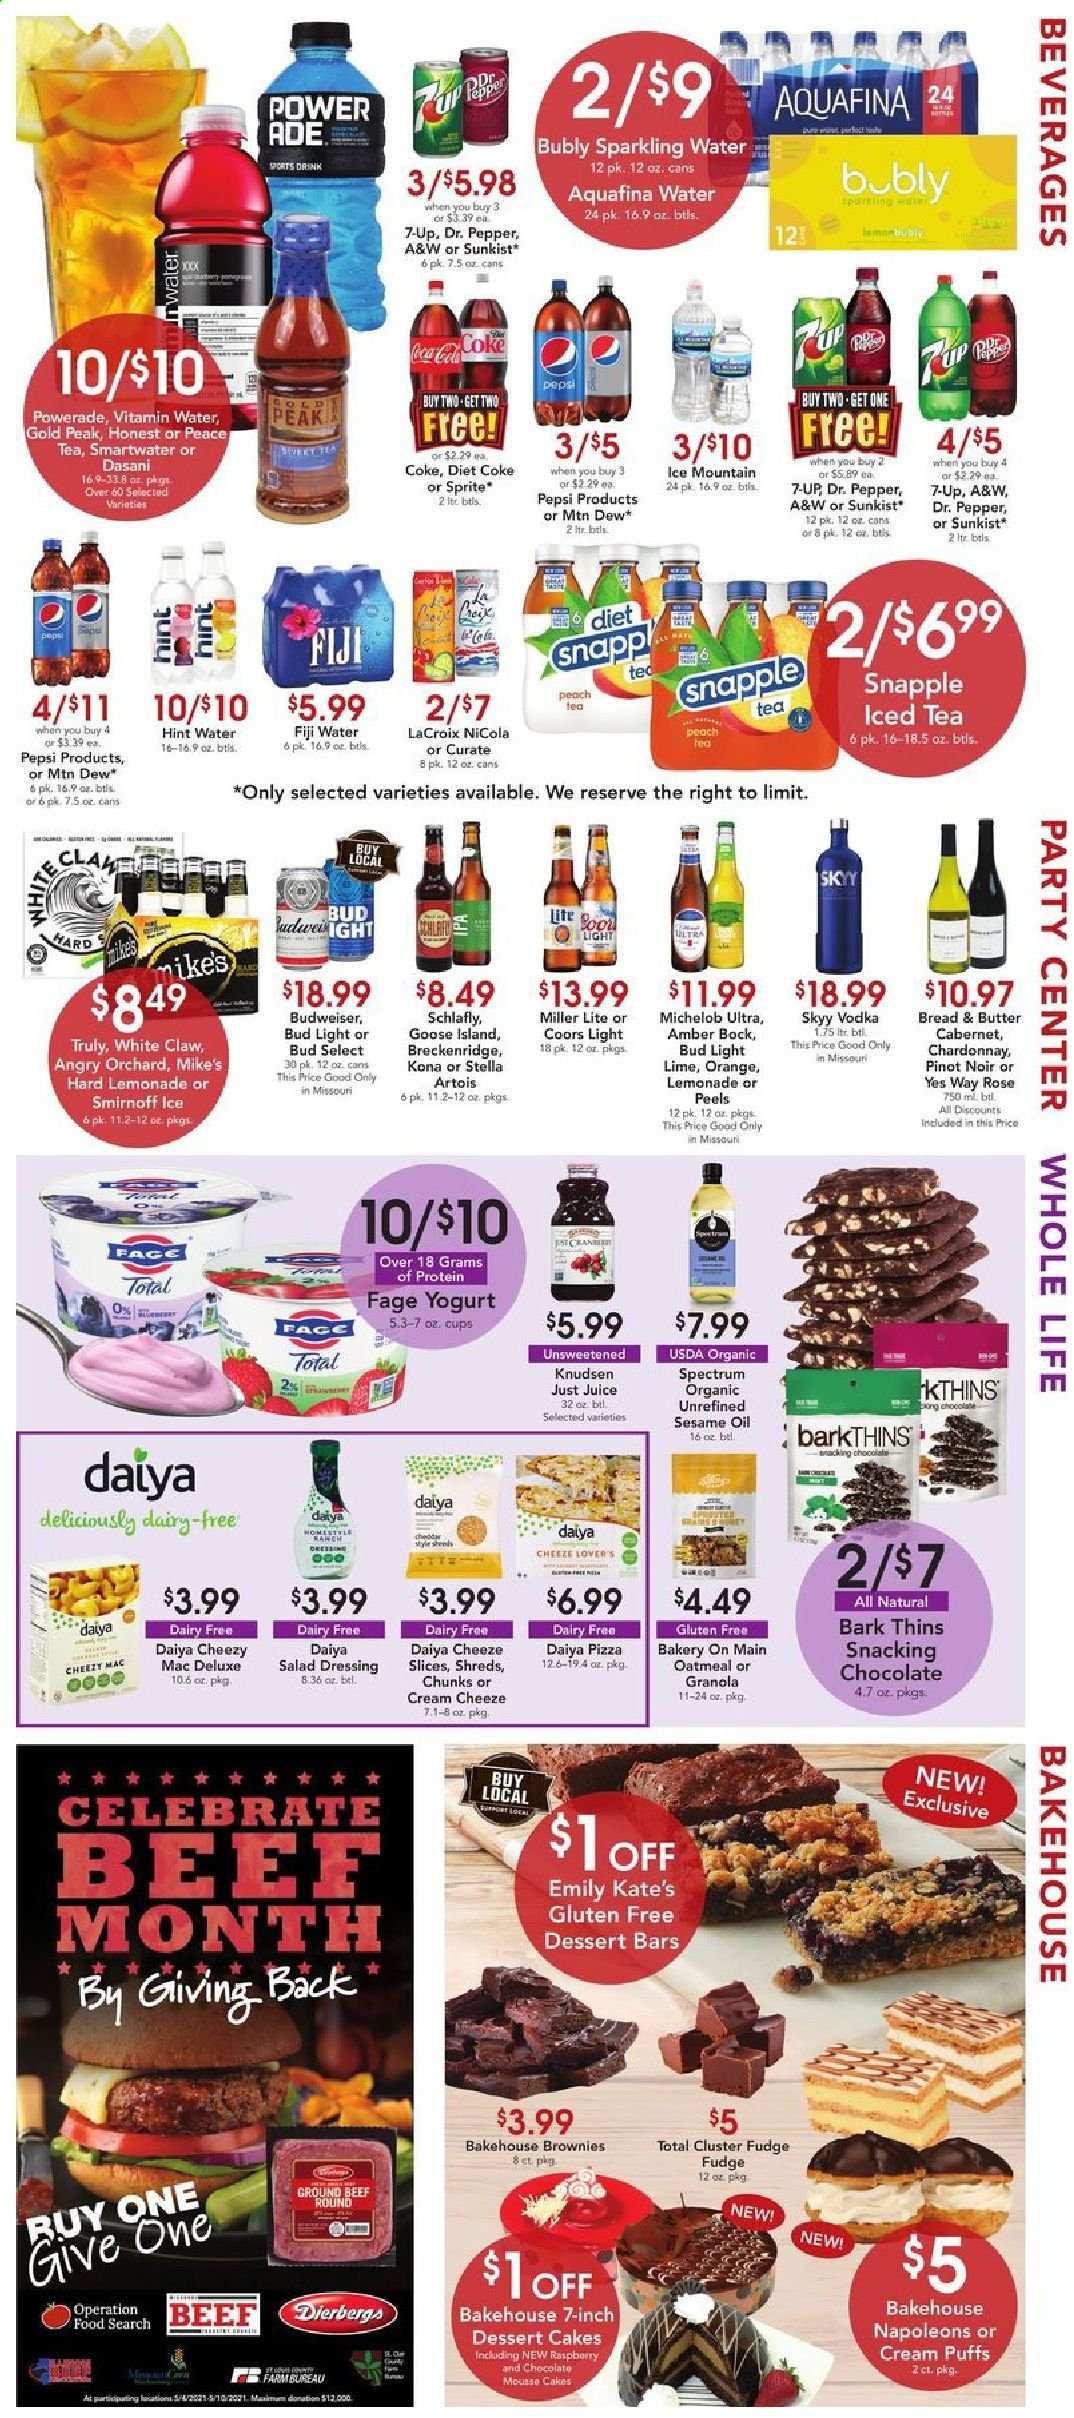 thumbnail - Dierbergs Flyer - 05/04/2021 - 05/10/2021 - Sales products - Budweiser, Miller Lite, Stella Artois, Coors, Michelob, cake, puffs, brownies, cream puffs, pizza, yoghurt, butter, fudge, Cluster Fudge, Thins, oatmeal, granola, pepper, salad dressing, dressing, sesame oil, oil, lemonade, Mountain Dew, Sprite, Powerade, Pepsi, juice, ice tea, Dr. Pepper, Diet Coke, 7UP, Snapple, A&W, Aquafina, sparkling water, Smartwater, vitamin water, Cabernet Sauvignon, red wine, white wine, Chardonnay, wine, Pinot Noir, rosé wine, Smirnoff, vodka, SKYY, White Claw, TRULY, beer, Bud Light, beef meat, ground beef, rose, Spectrum. Page 5.